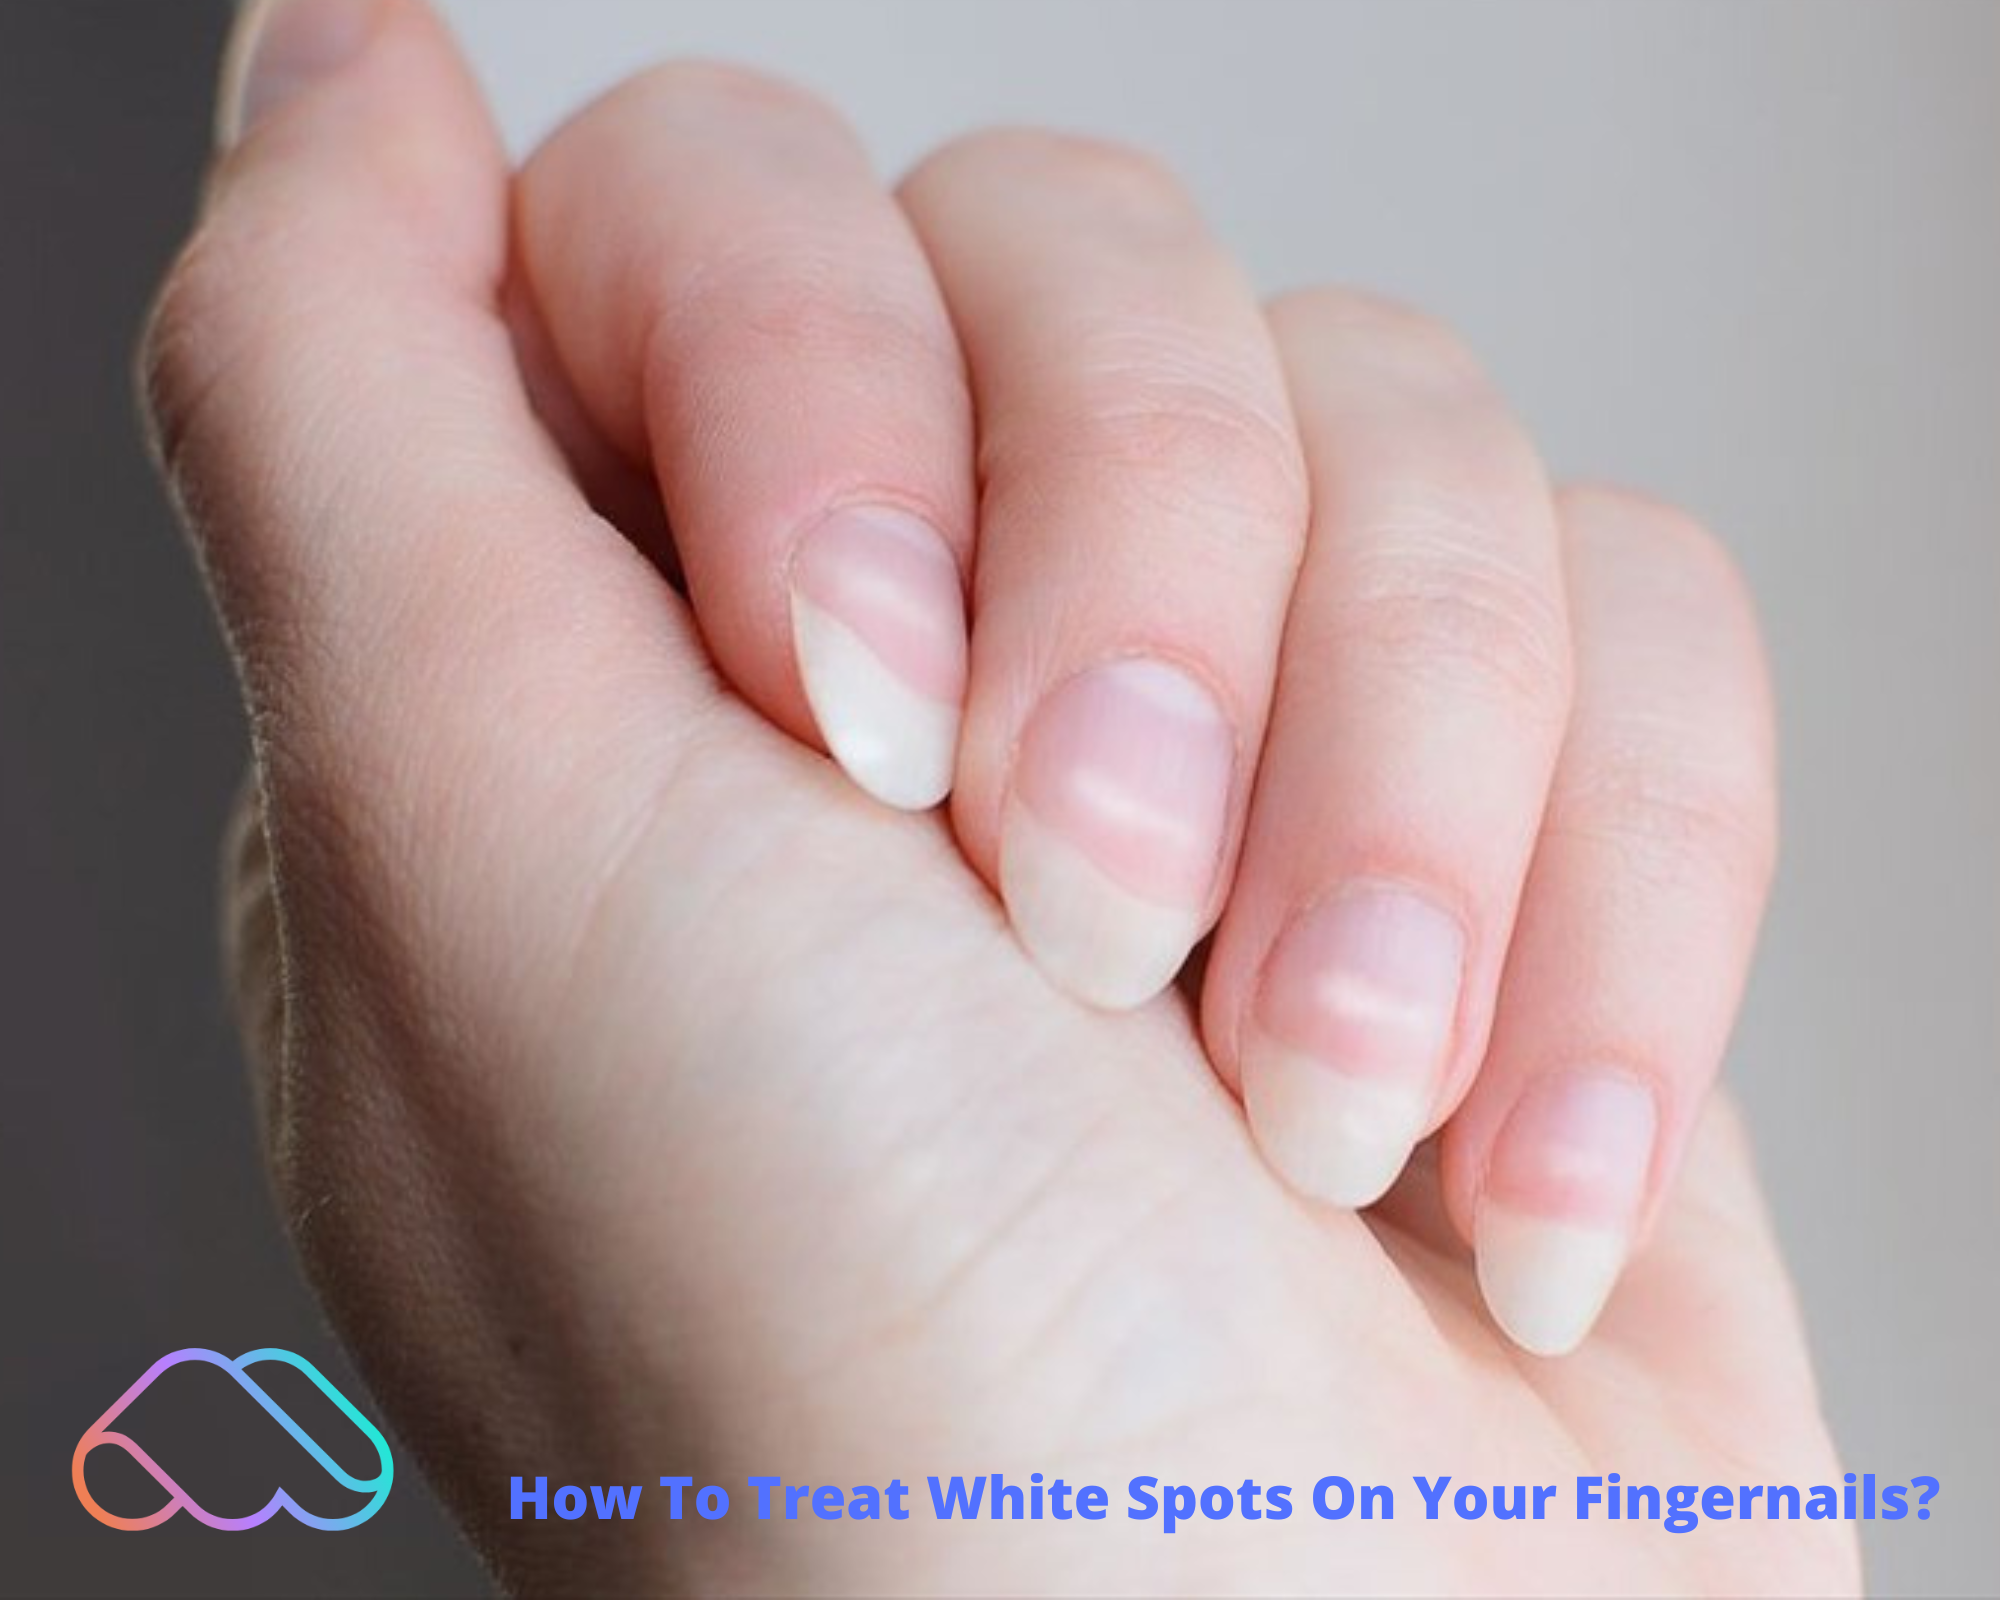 How To Treat White Spots On Your Fingernails?